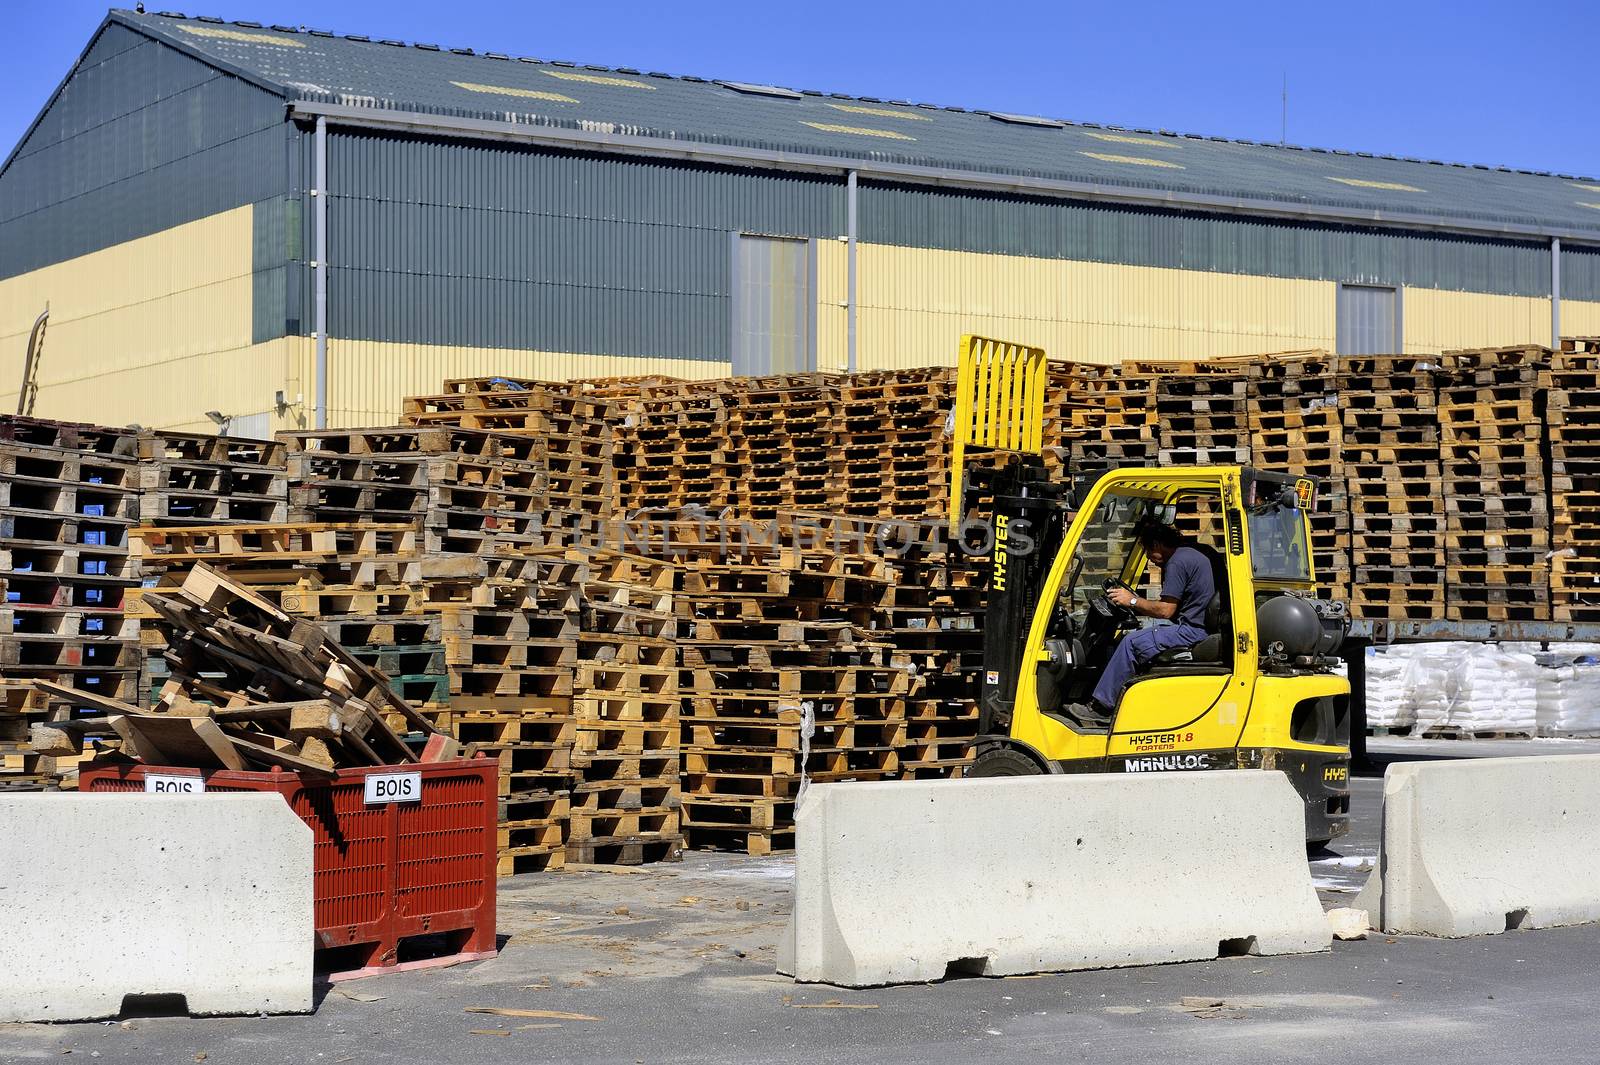 handling and storage of pallets in a warehouse awaiting reuse for transporting goods